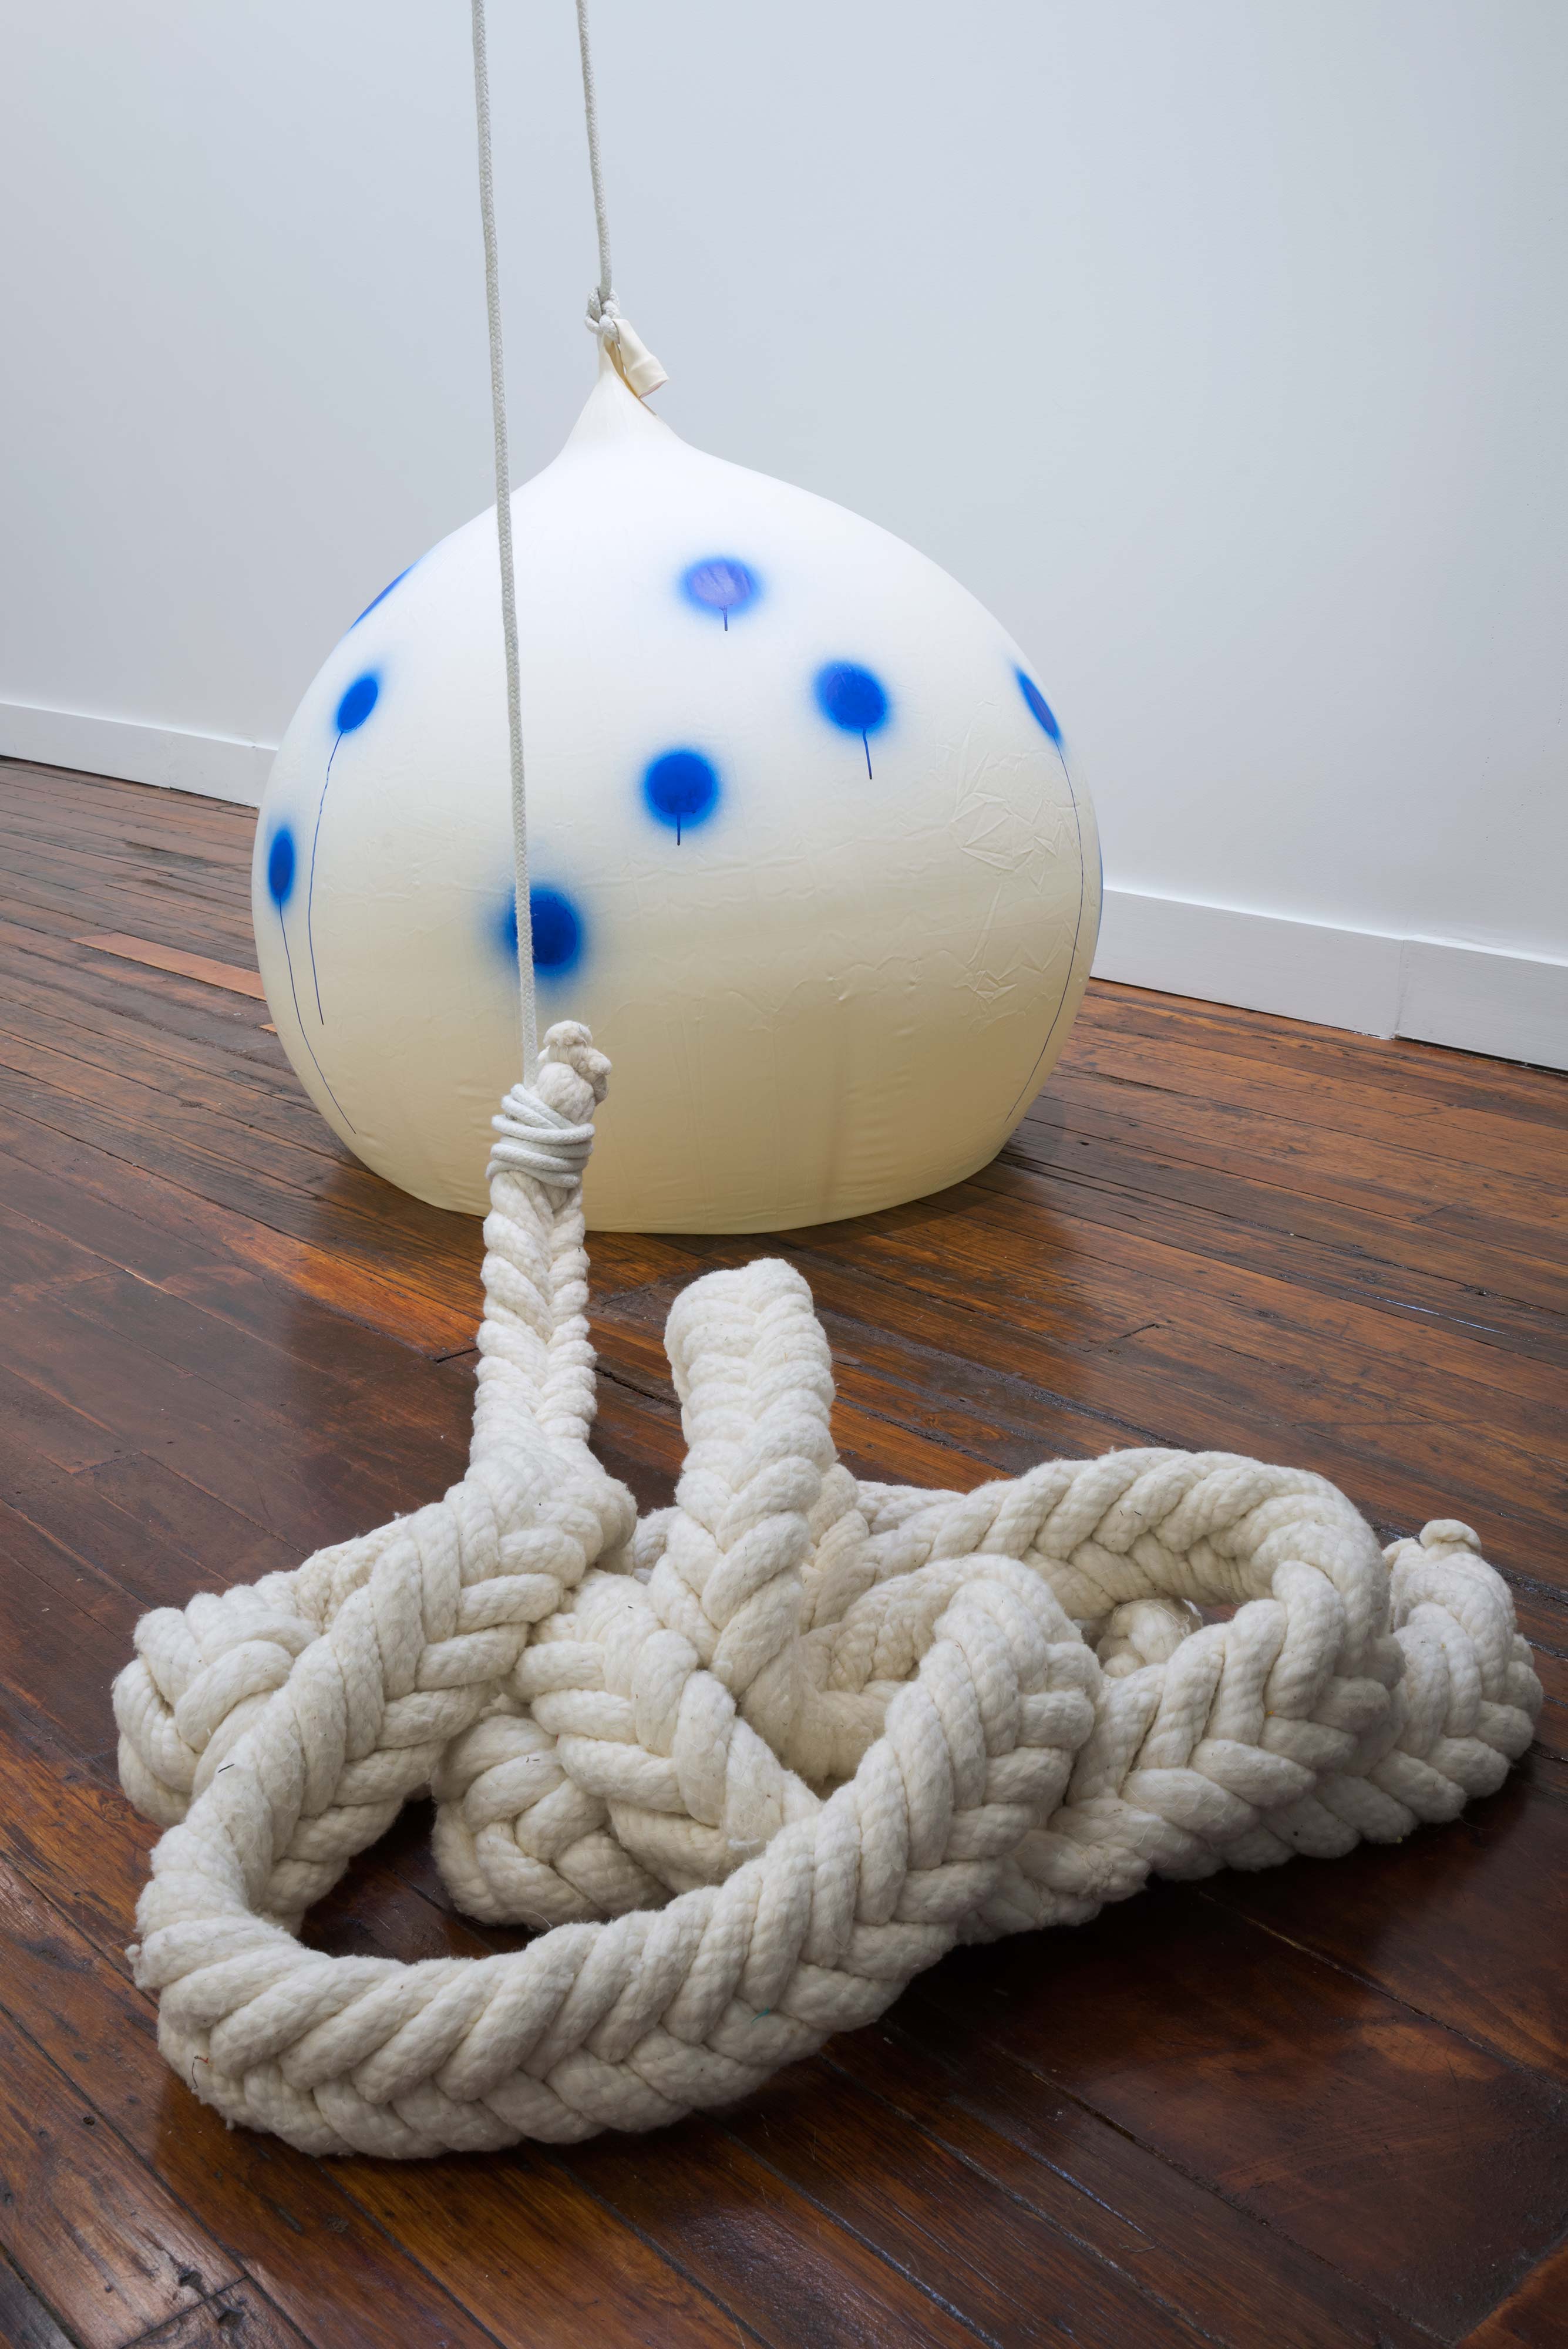 Nancy Davidson<br>Fallen Cloud (II)<br>1997-2016<br>latex, rope, paint, cotton<br>36 x 36 in (91 x 91 cm), height variable